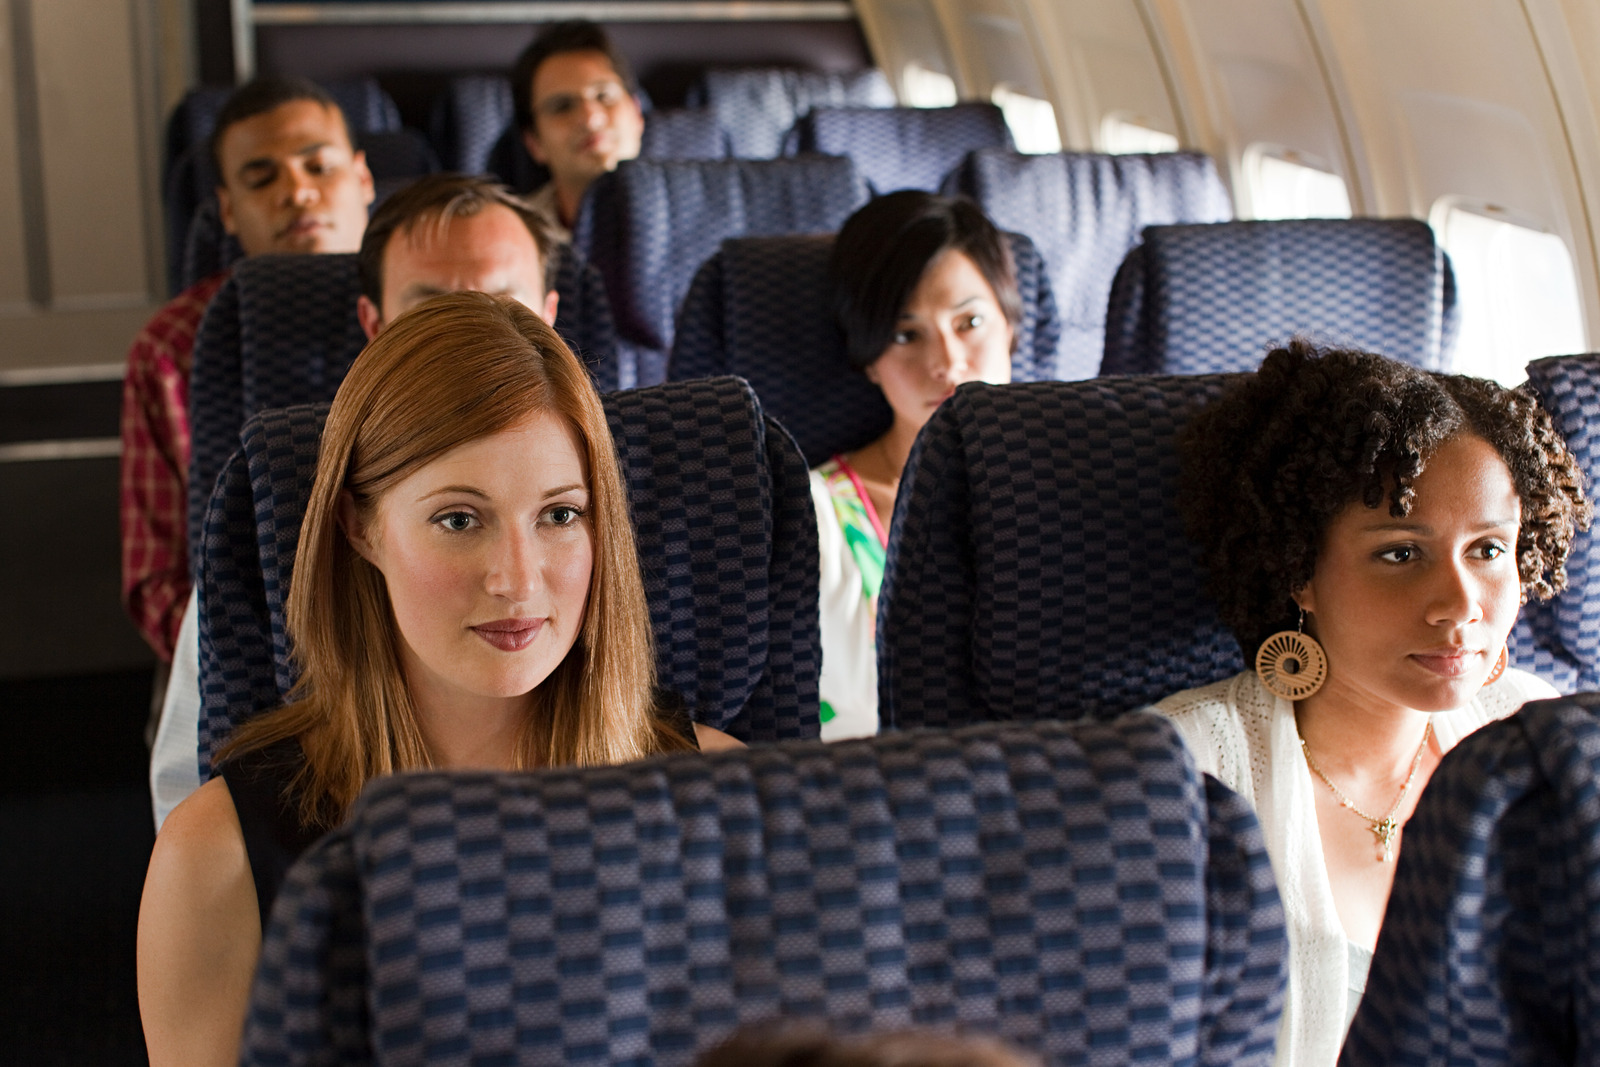 Woman Gets Choked Out On A Plane For Calling Black Flight Attendant The 'N' Word